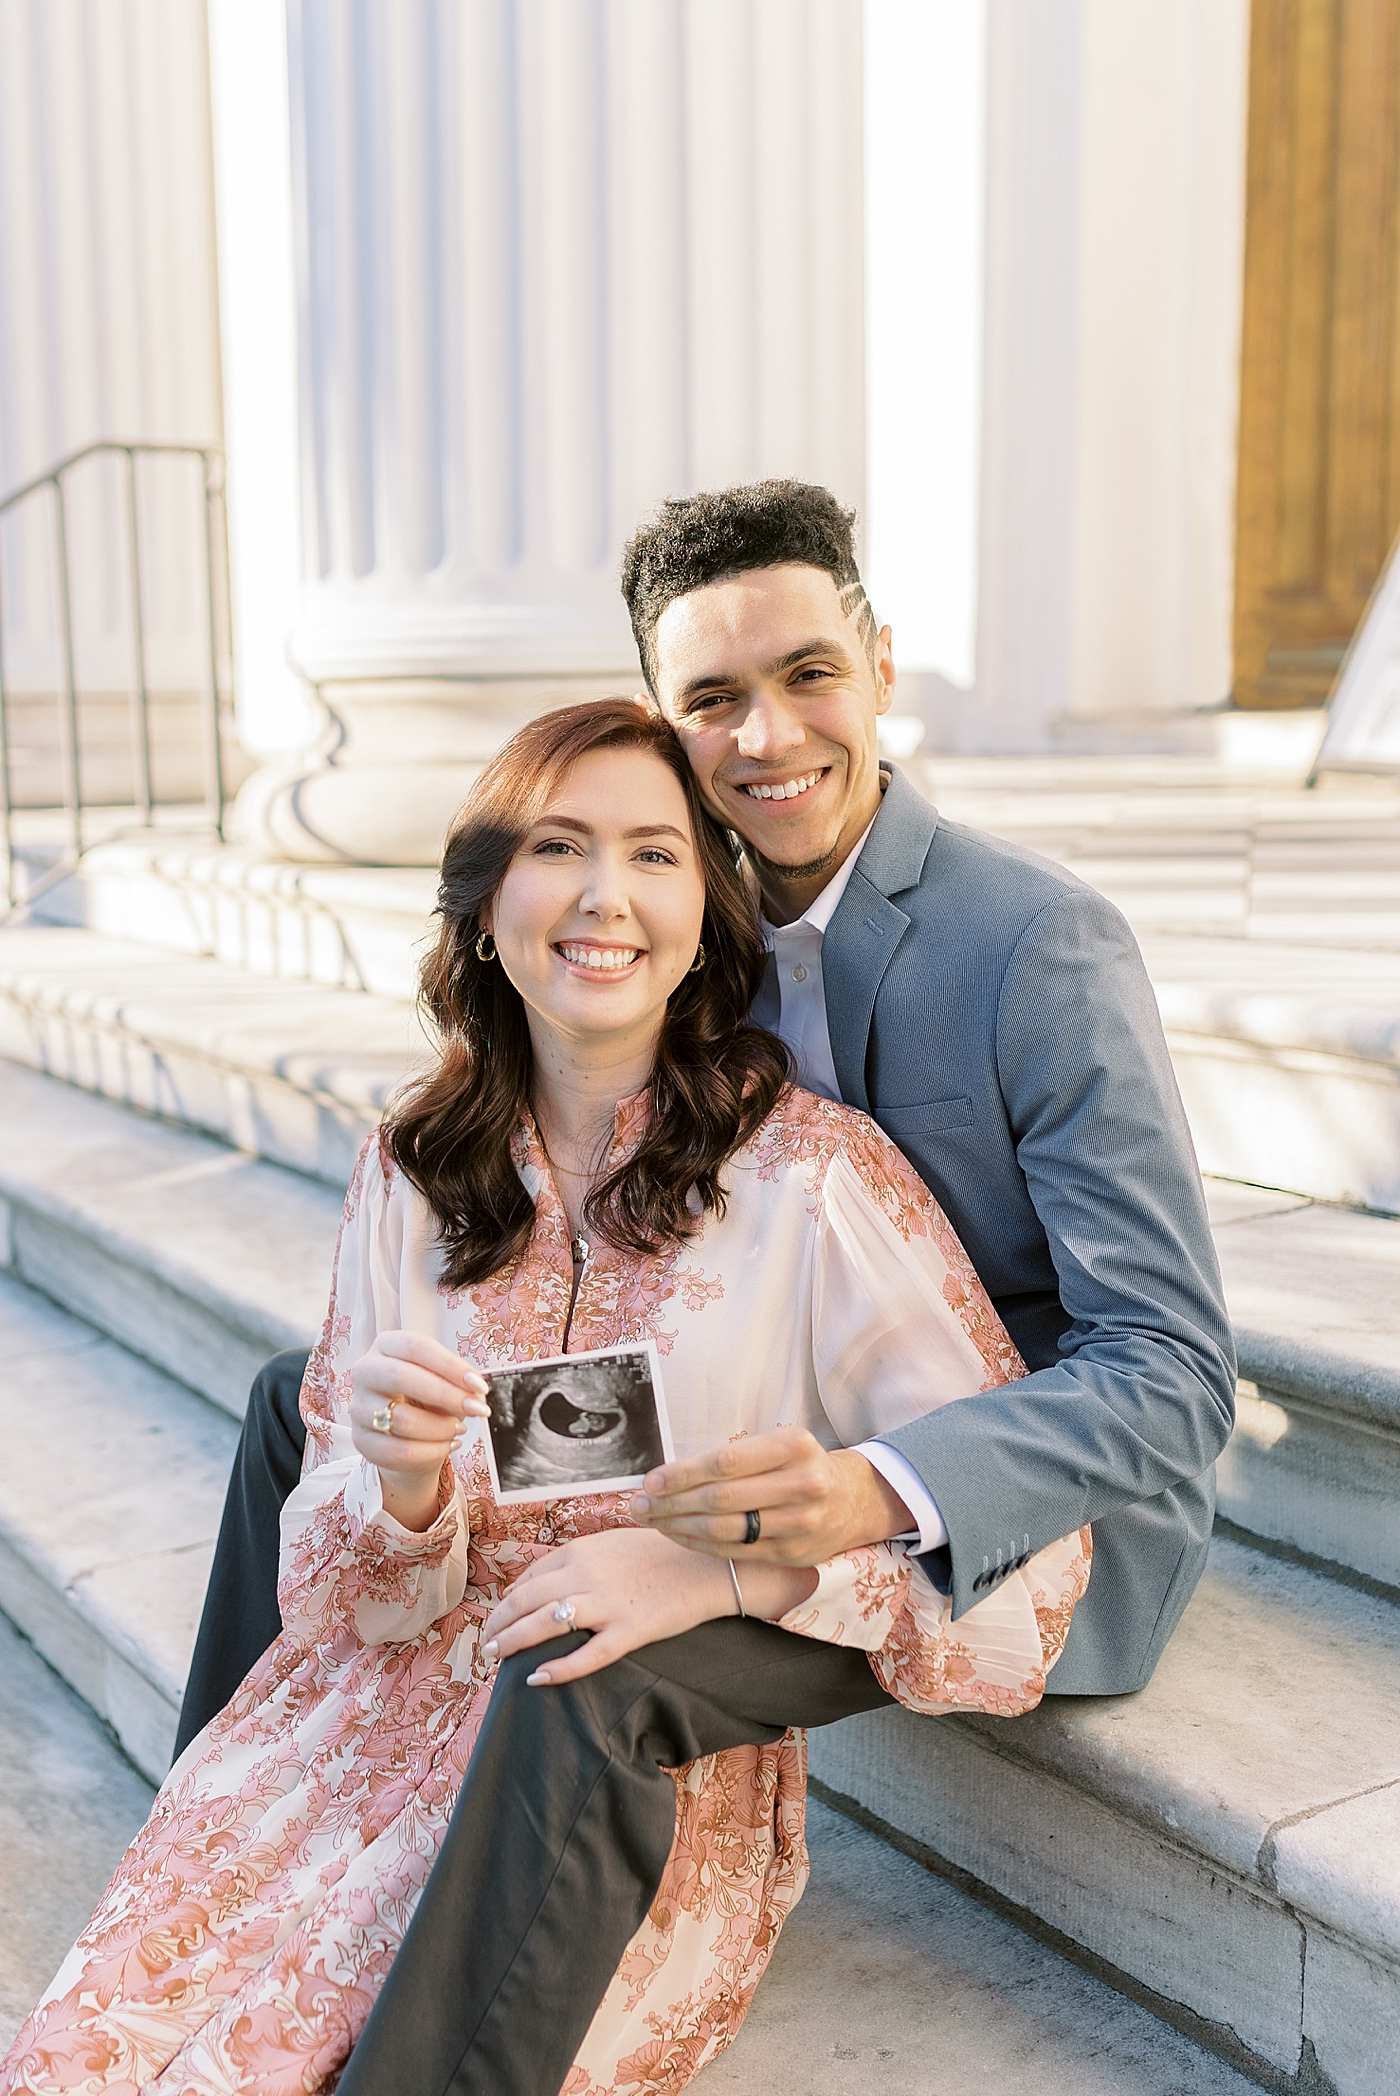 Mom and dad to be smiling holding their sonogram image | Photo by Caitlyn Motycka Photography